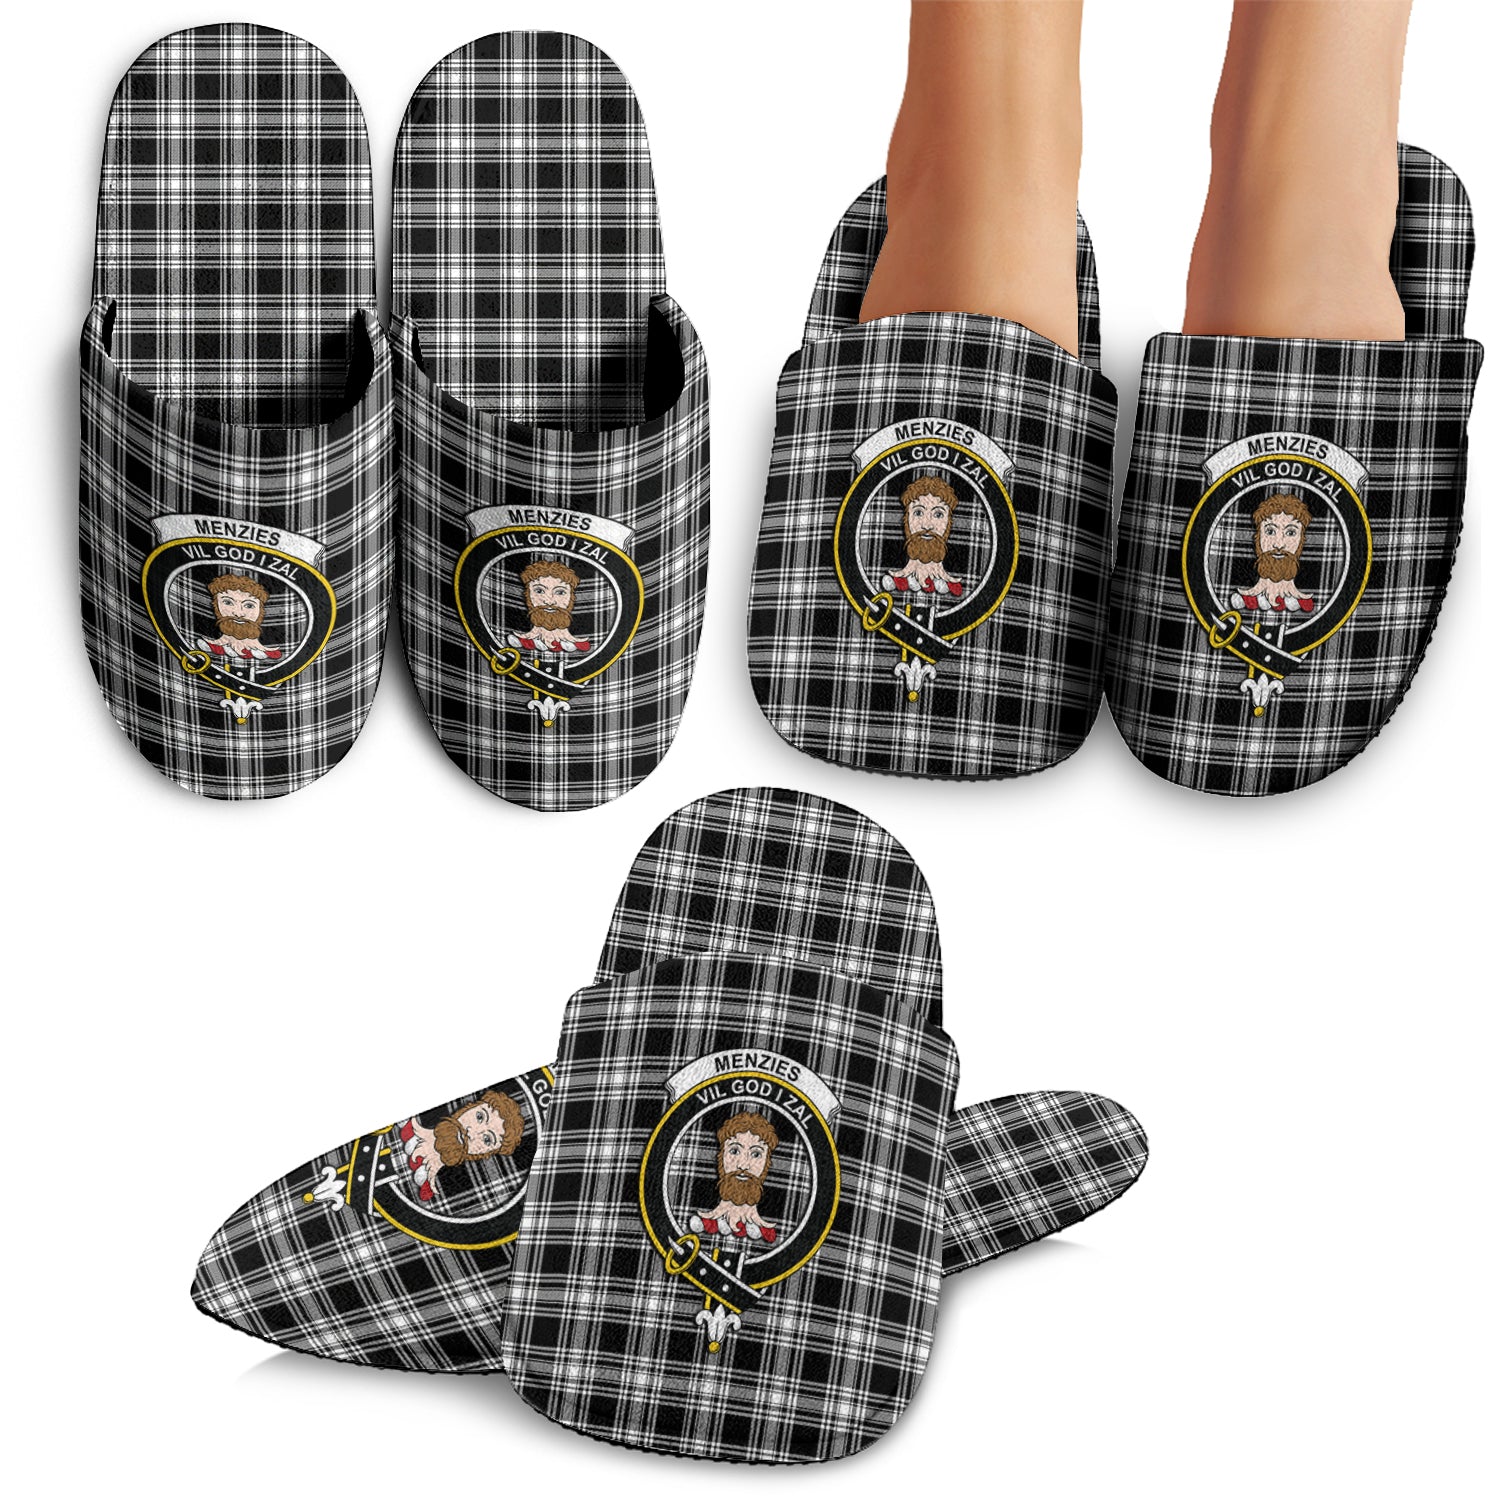 Menzies Black and White Tartan Home Slippers with Family Crest - Tartanvibesclothing Shop